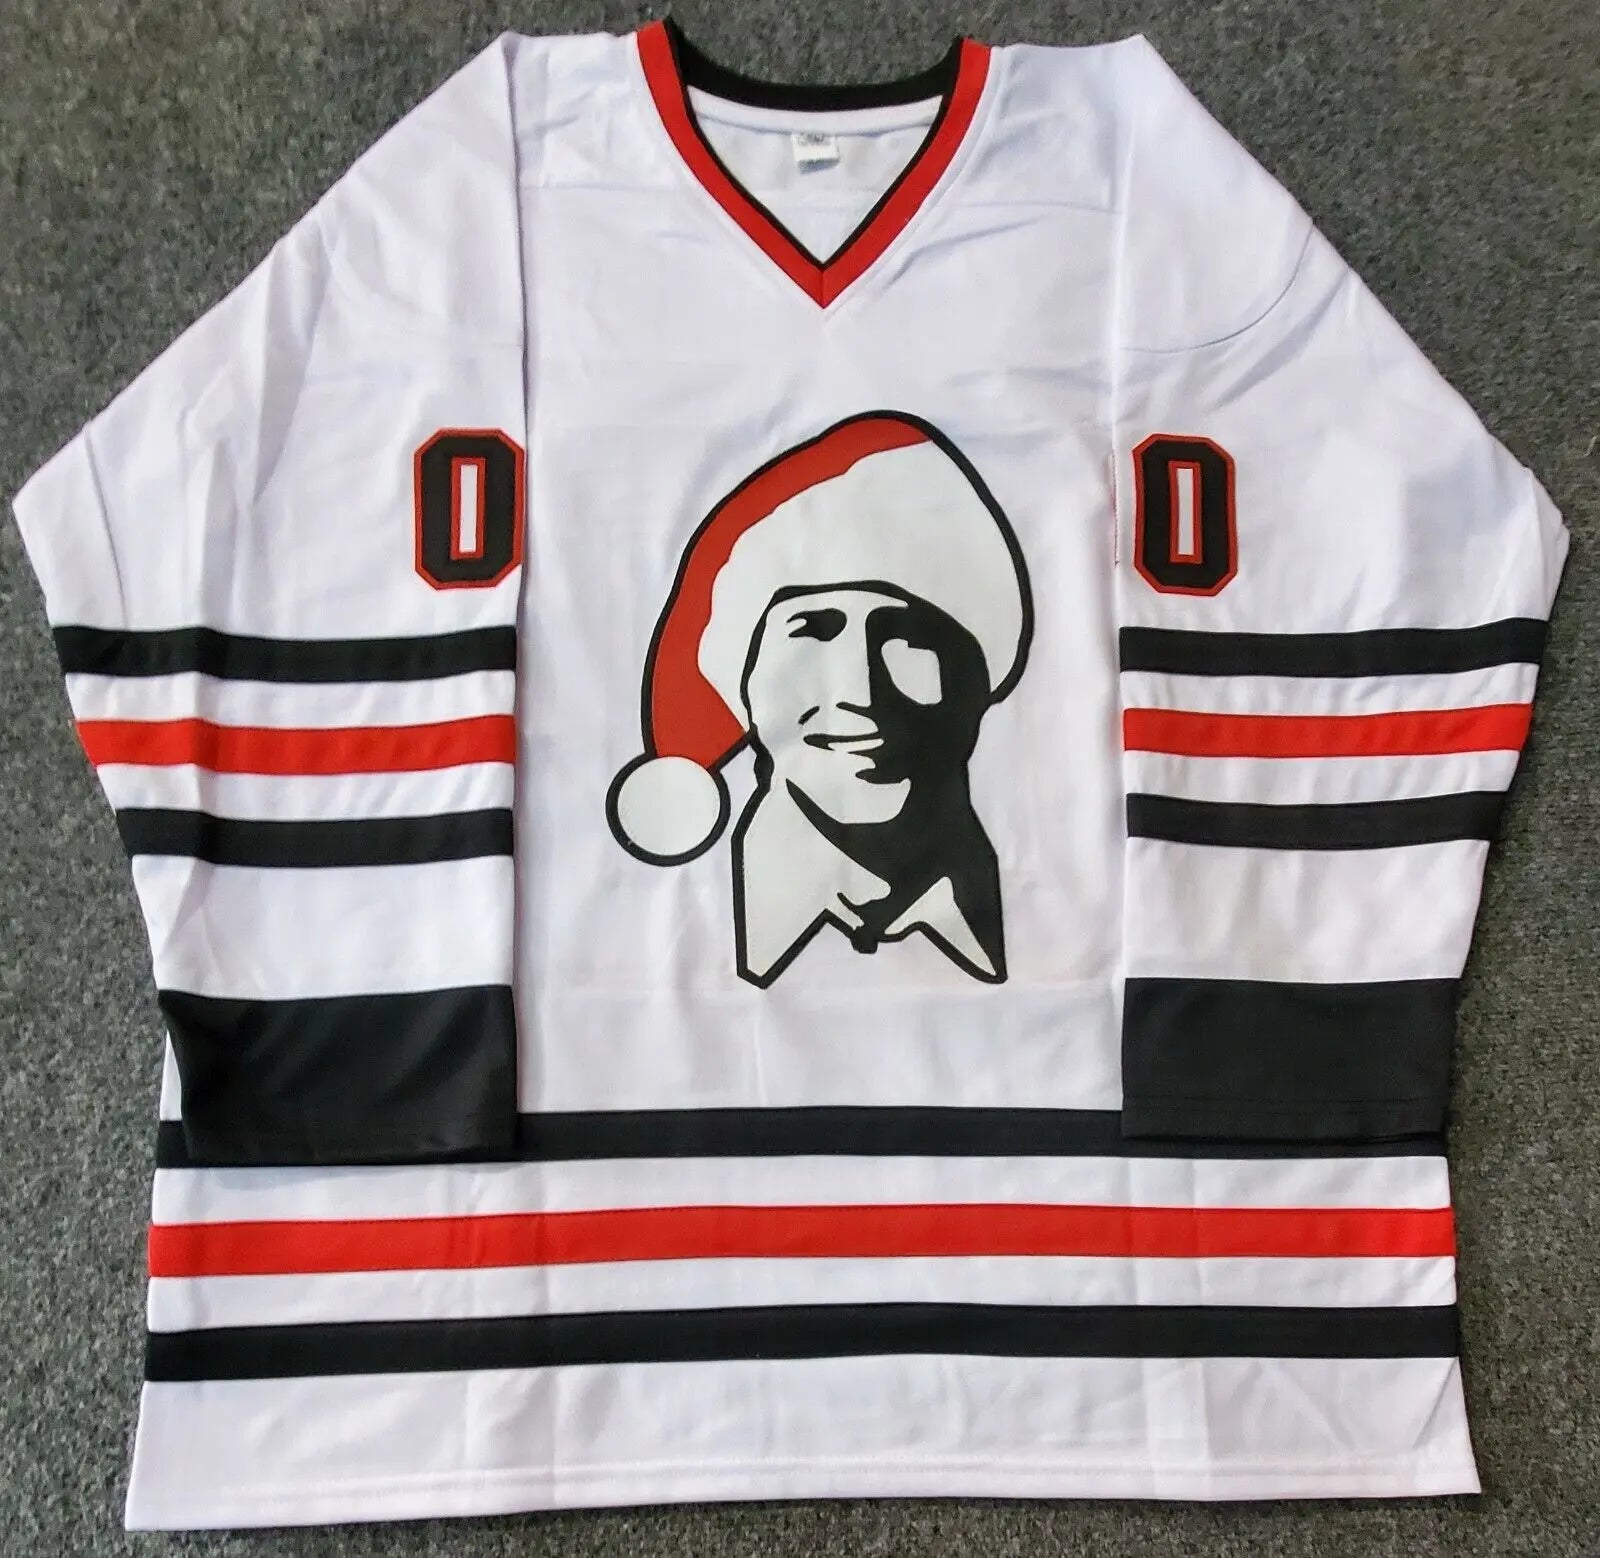 Framed Autographed/Signed Chevy Chase Clark Griswold 33x42 Christmas  Vacation Movie Chicago Red Hockey Jersey Beckett BAS COA - Hall of Fame  Sports Memorabilia